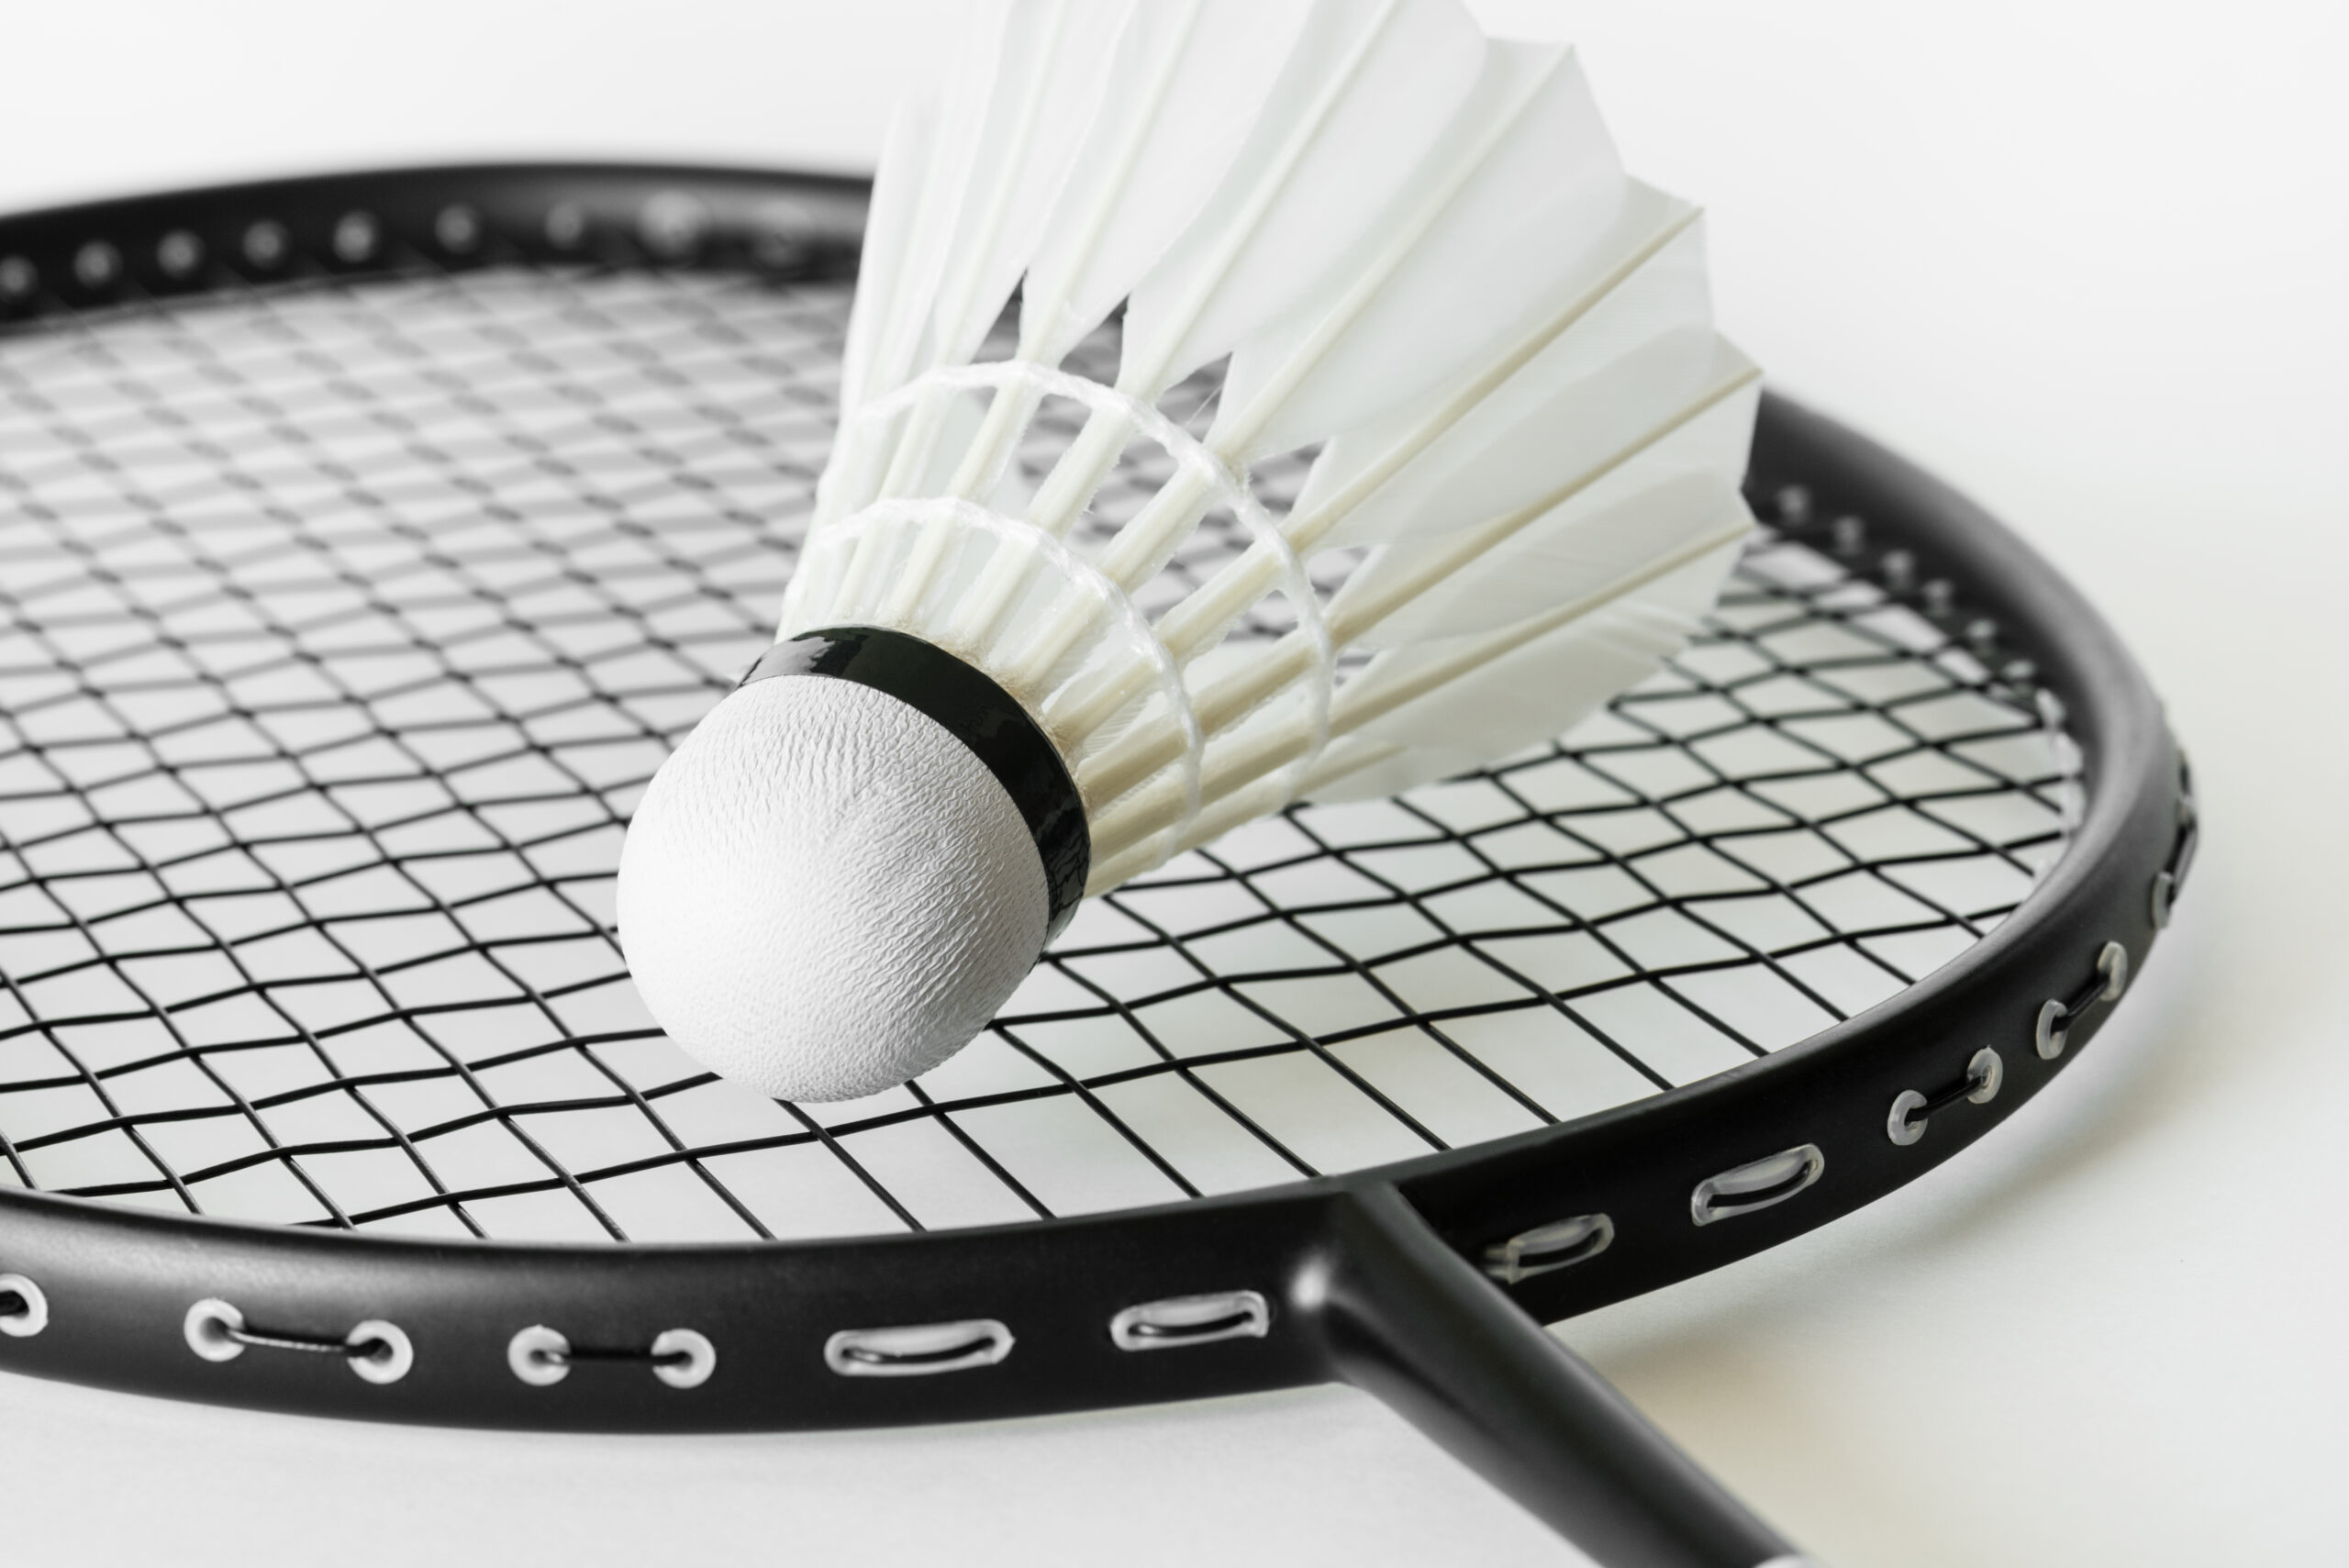 Badminton in Chteauguay, Local community, Sports enthusiasts, Active lifestyle, 2560x1710 HD Desktop